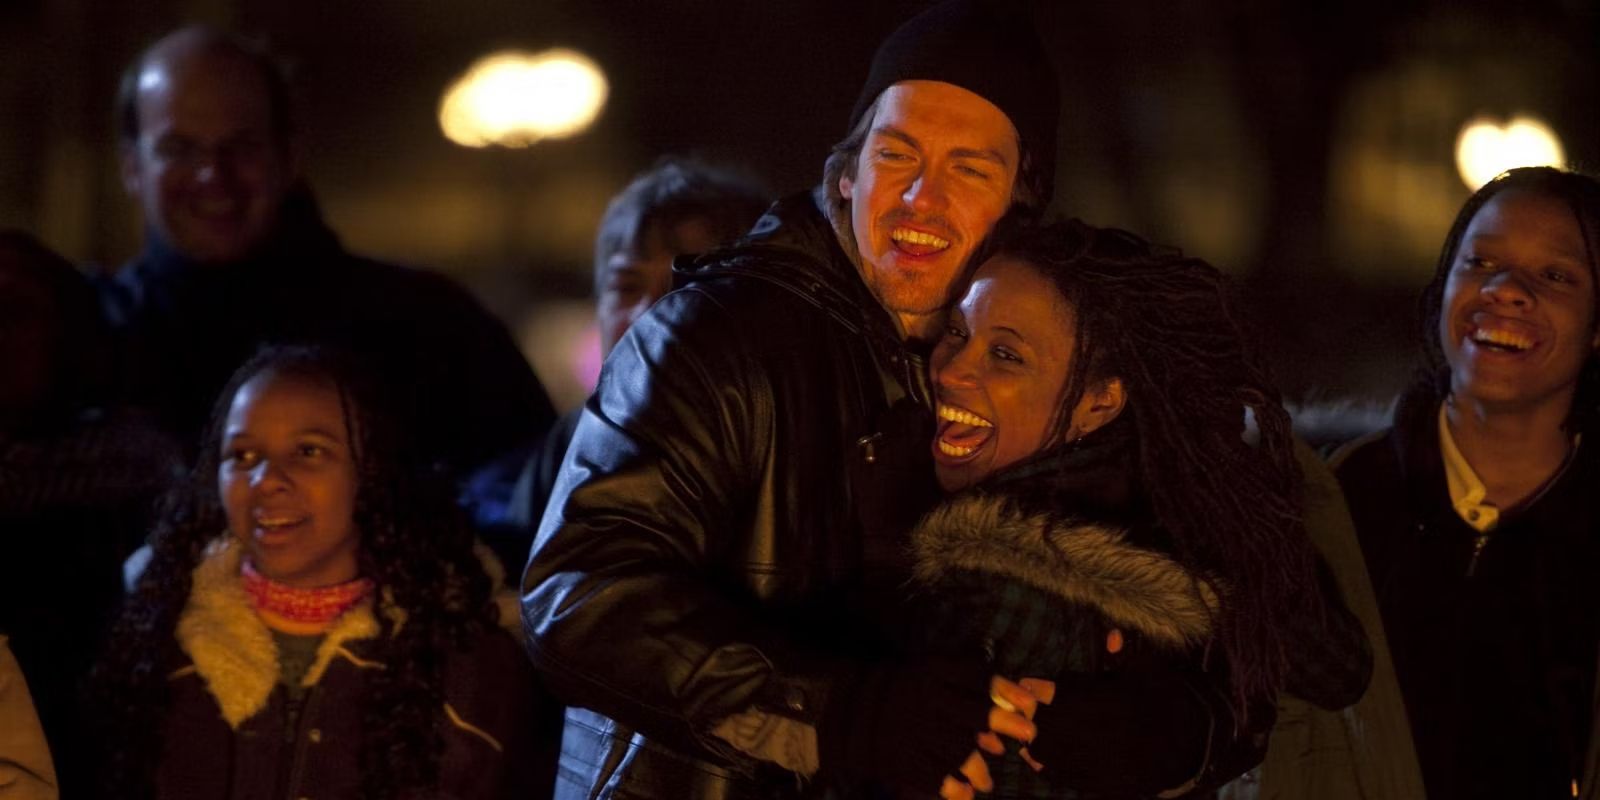 Kevin and Veronica hugging in an outdoor crowd at night on Shameless.